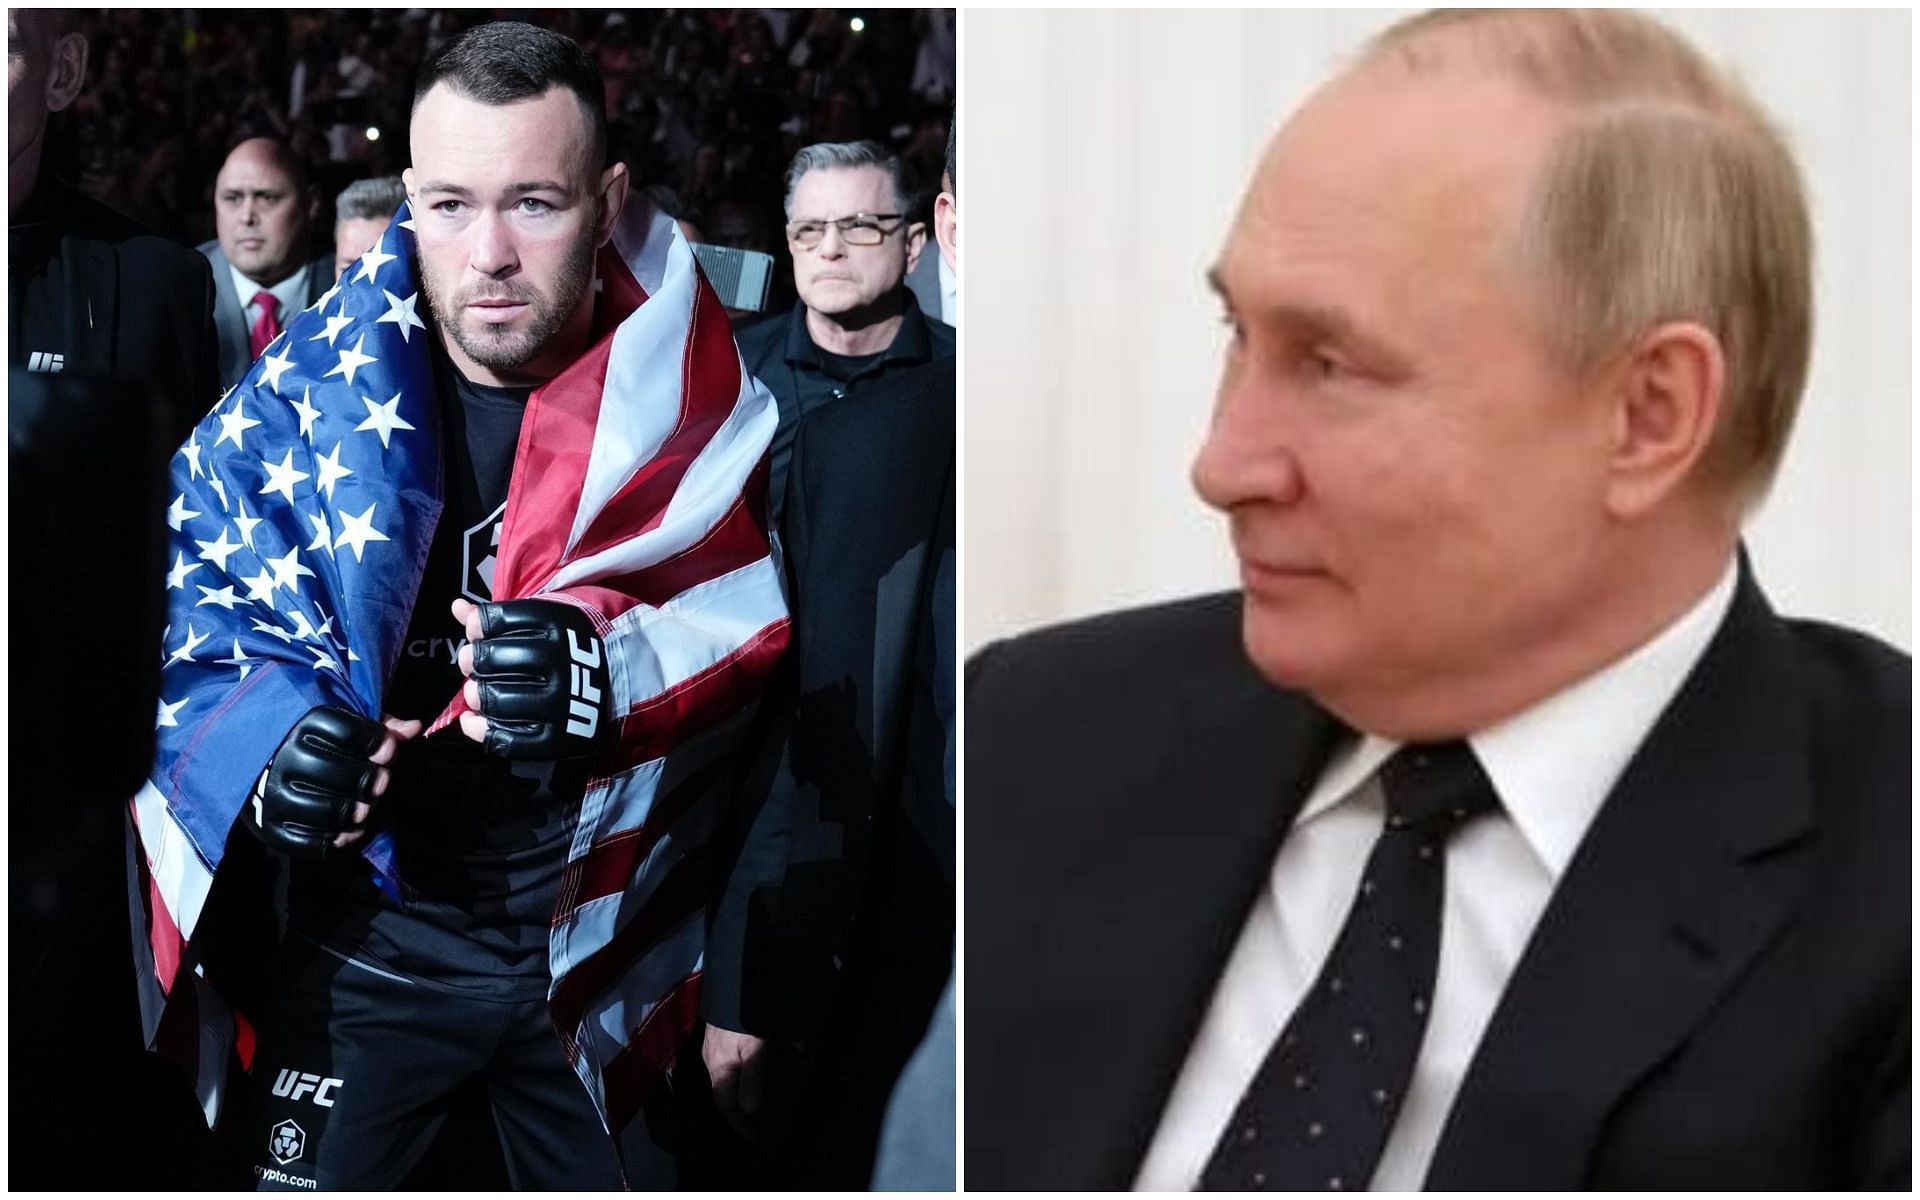 Colby Covington and the President of Russia Vladmir Putin